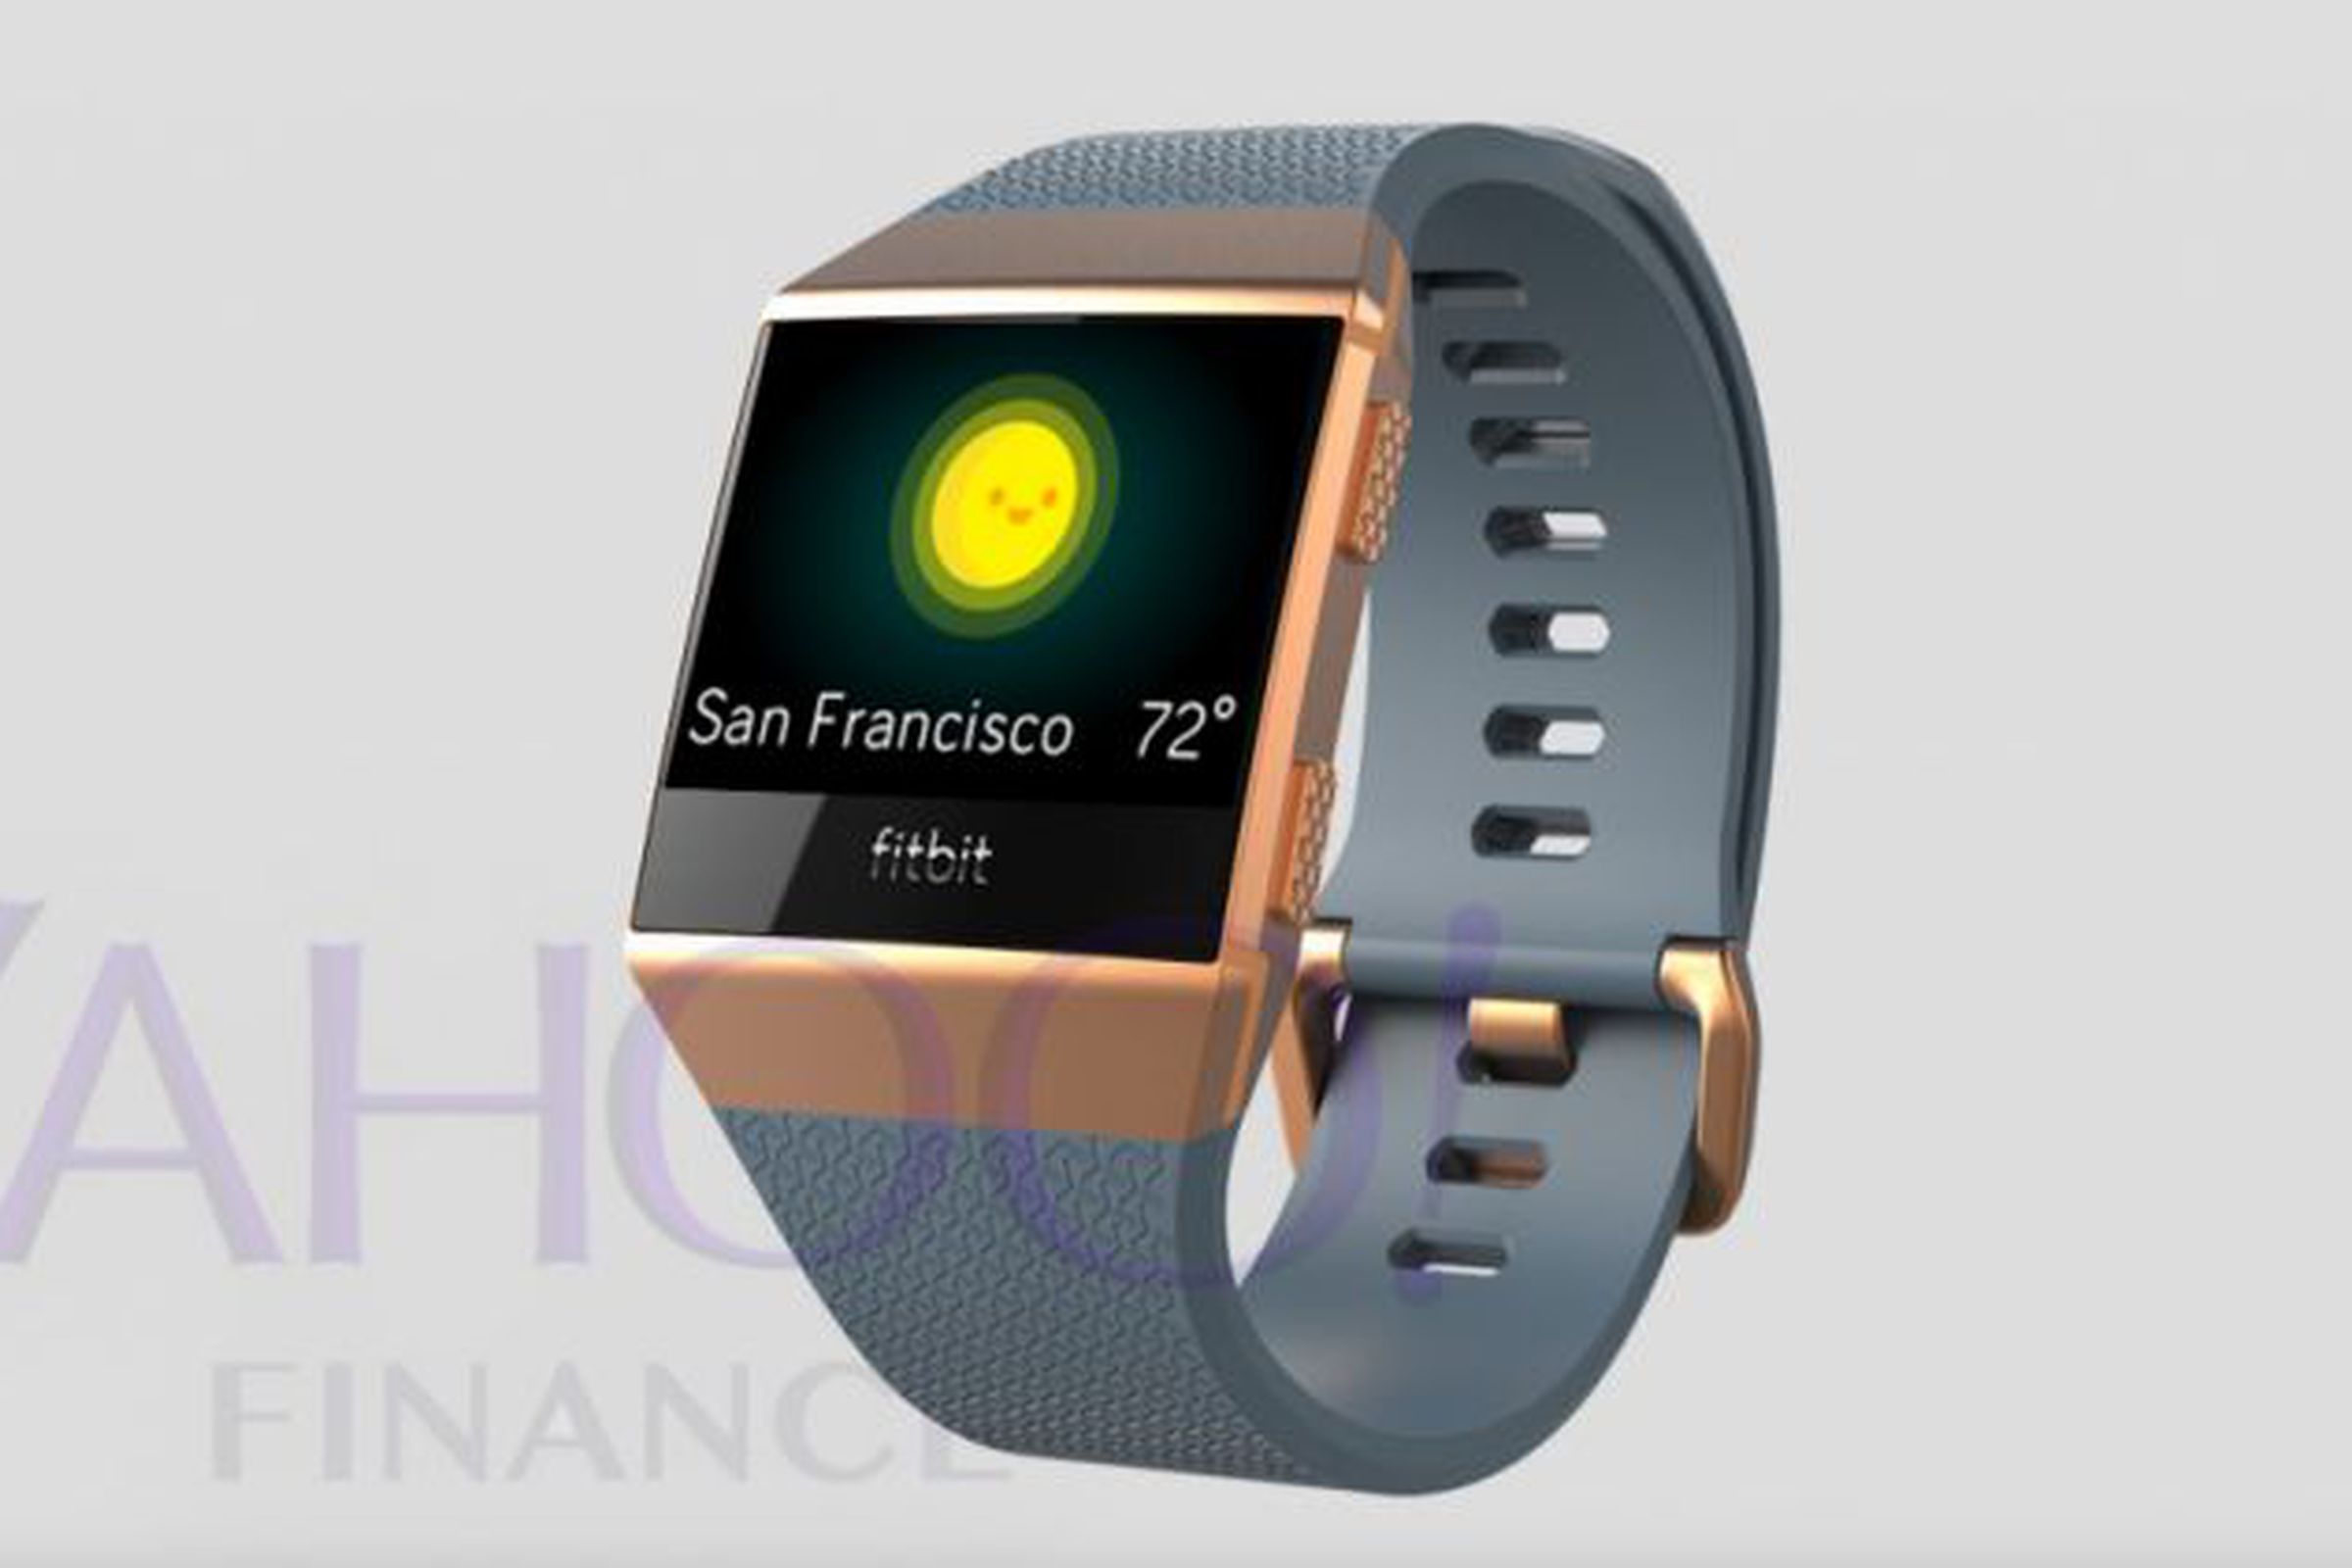 Leaked images of Fitbit’s upcoming smartwatch.